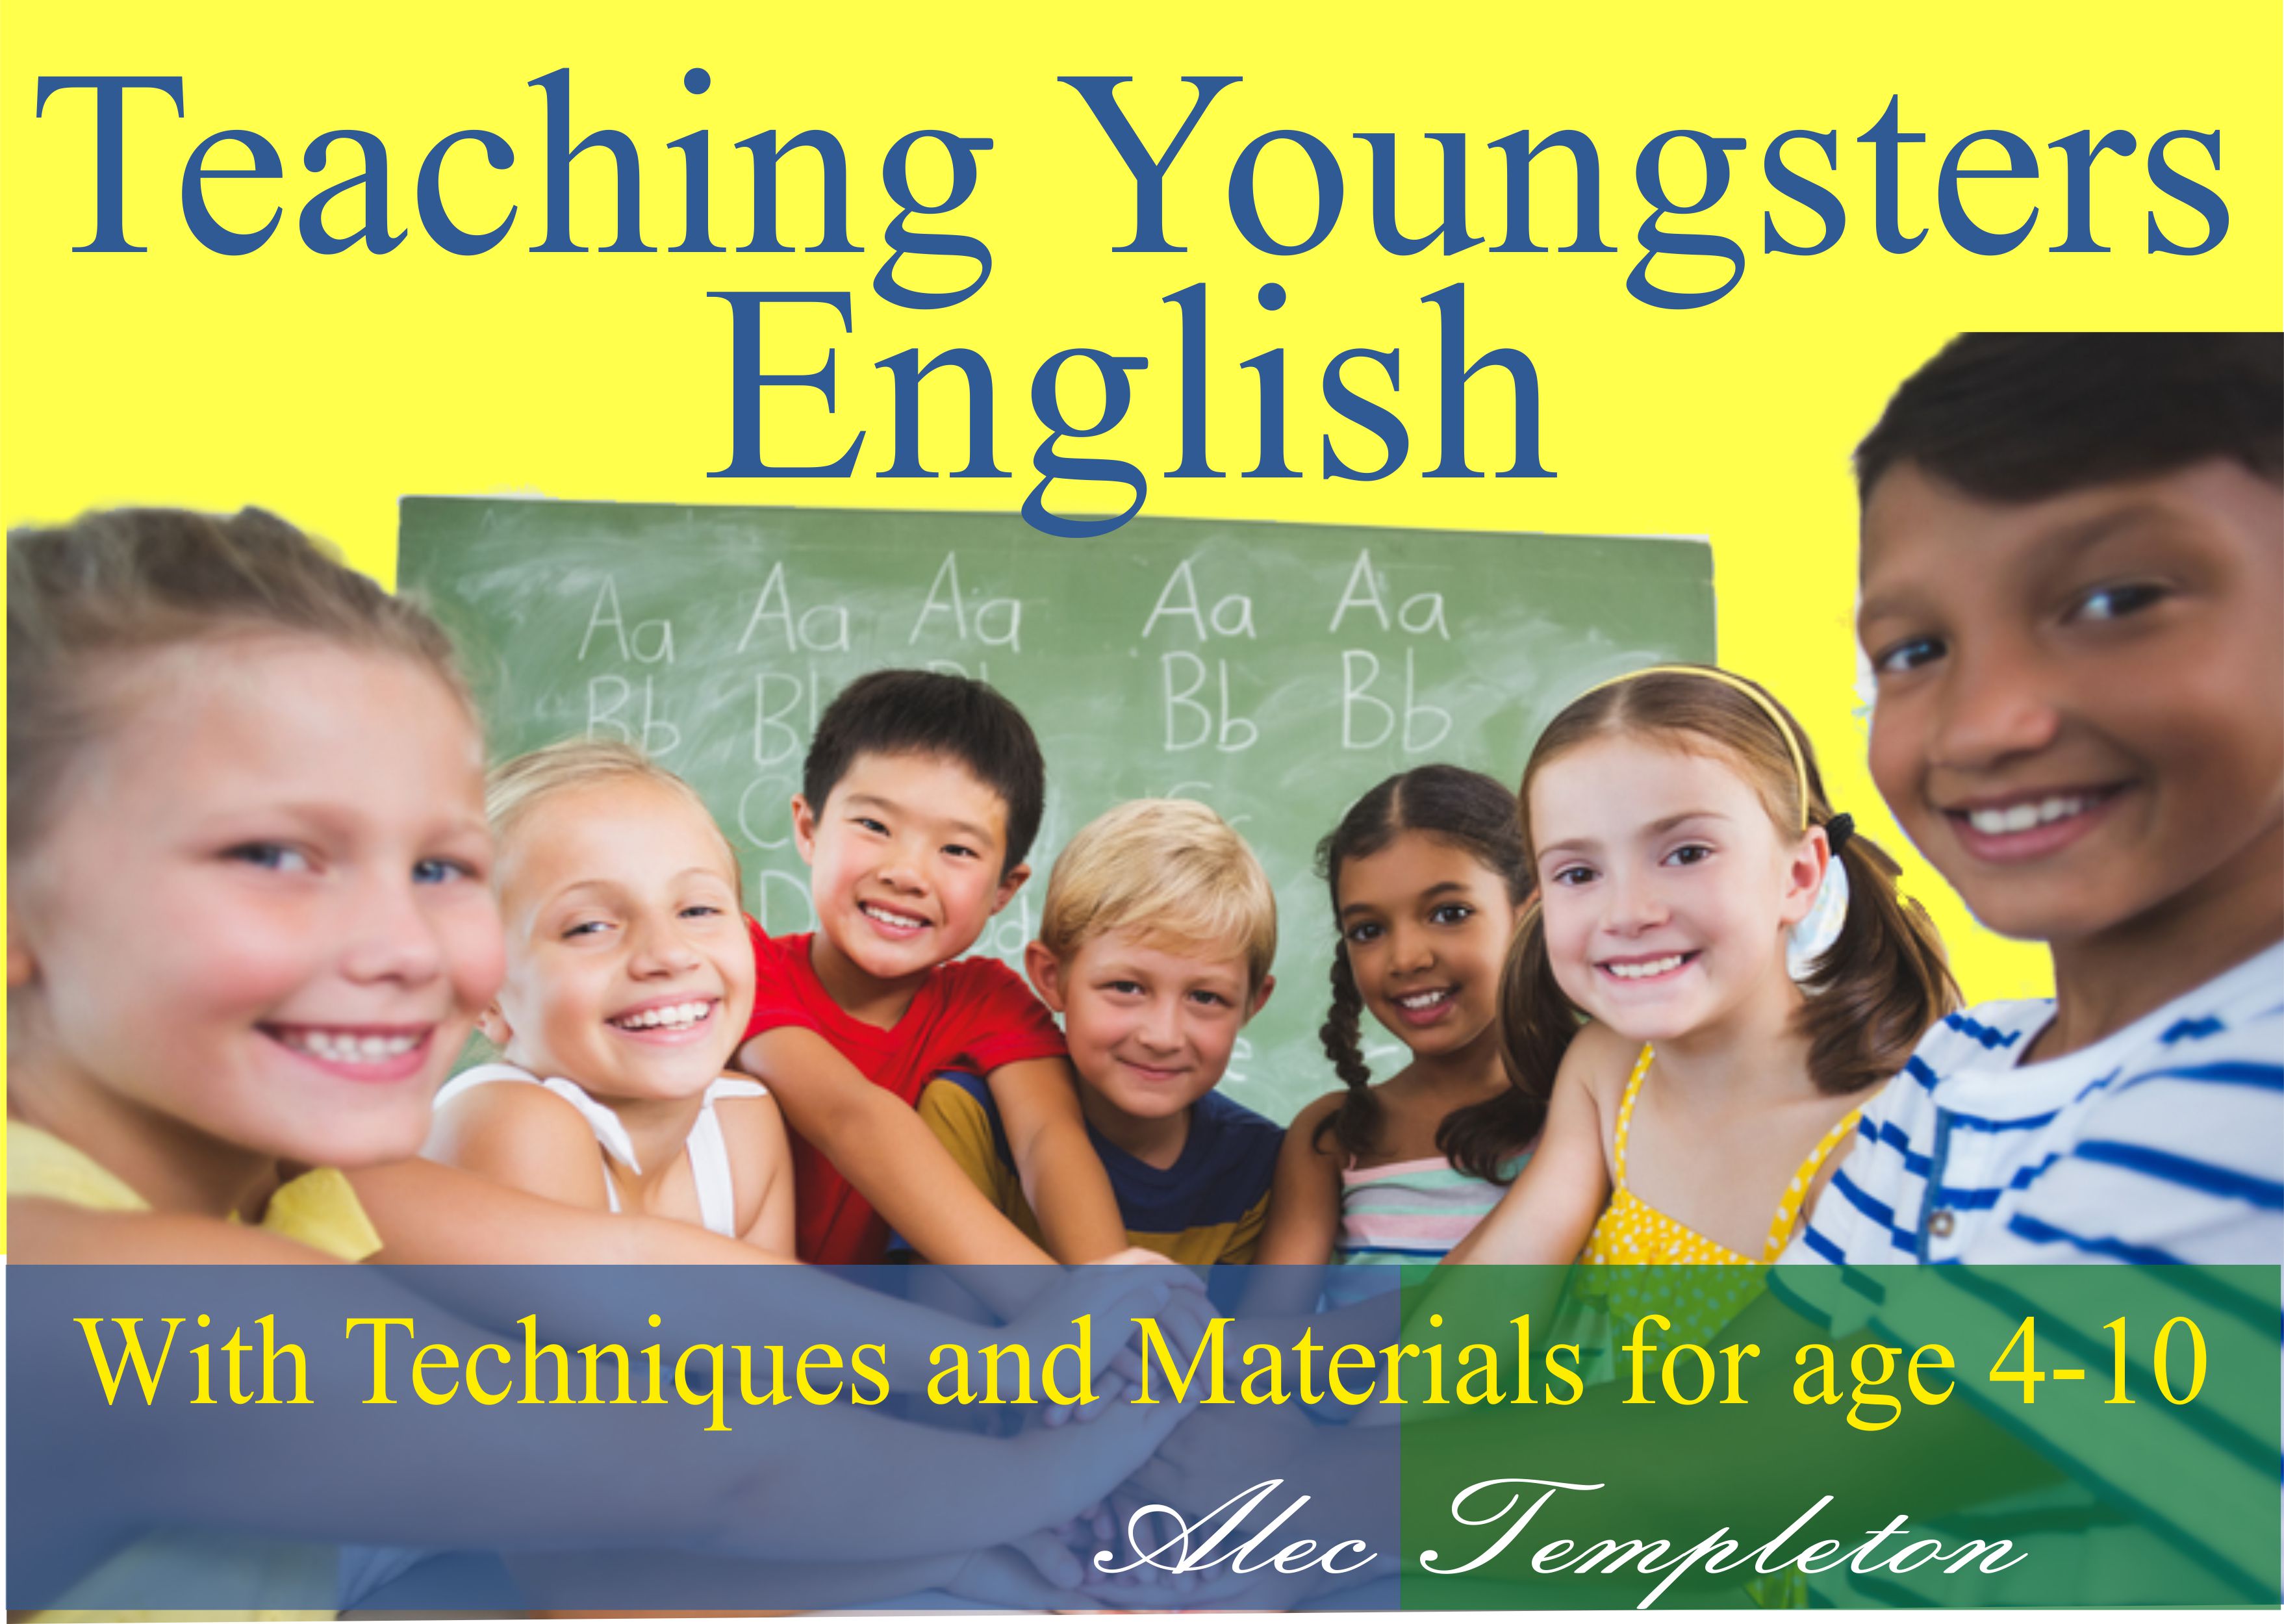 Book Cover: Teaching Youngsters English, by Alec Templeton